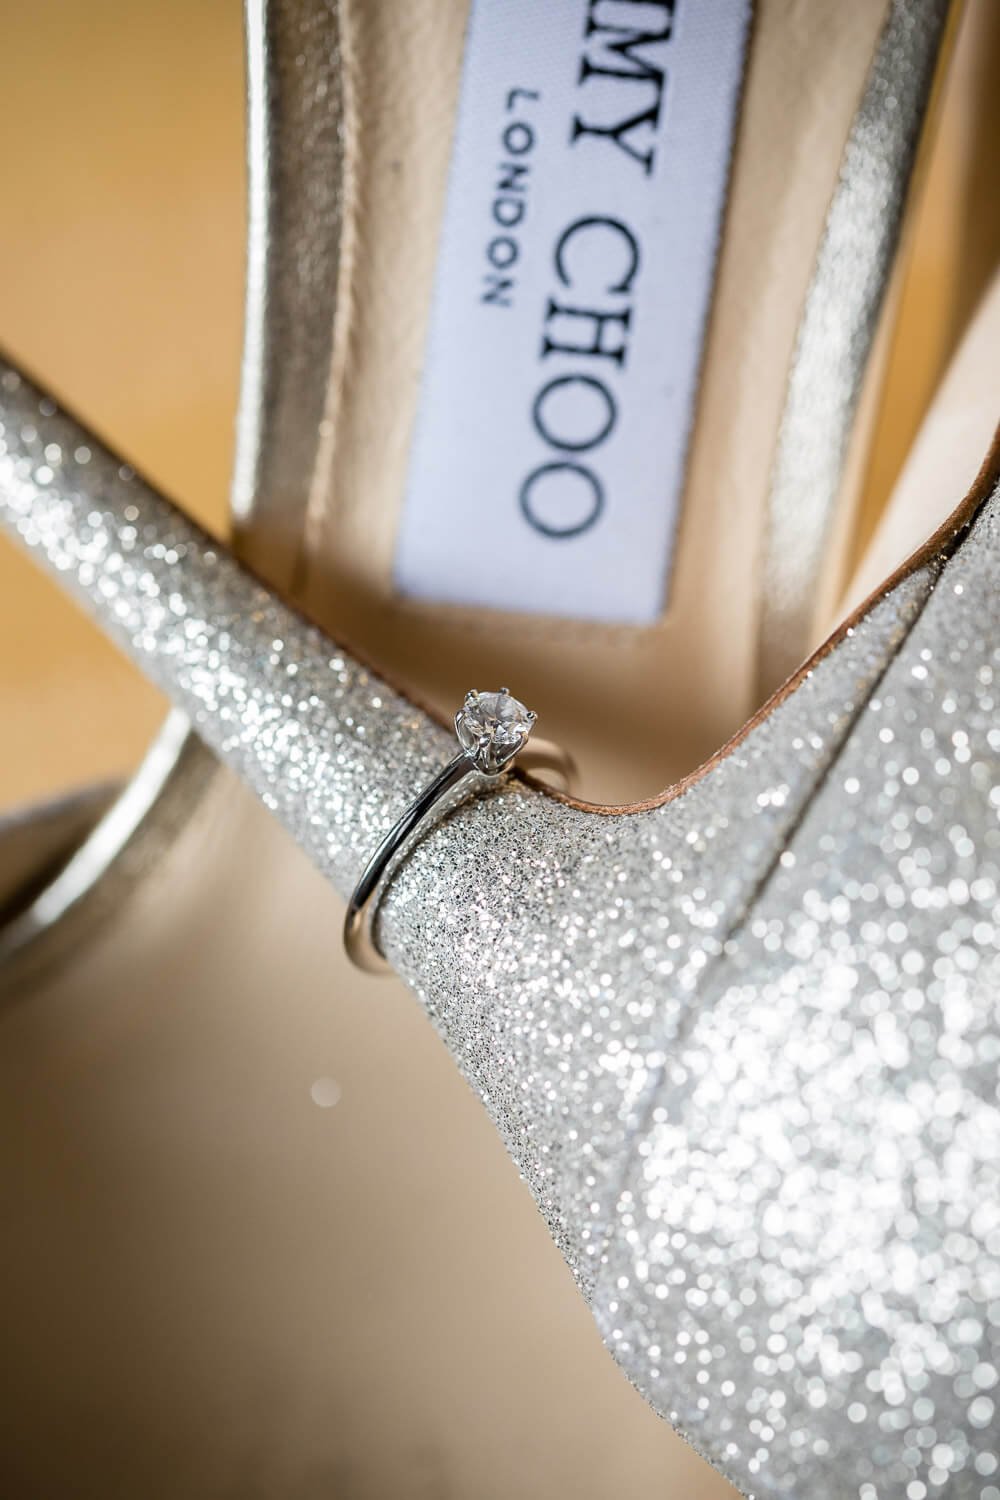 Engagement ring on Jimmy Choo shoes